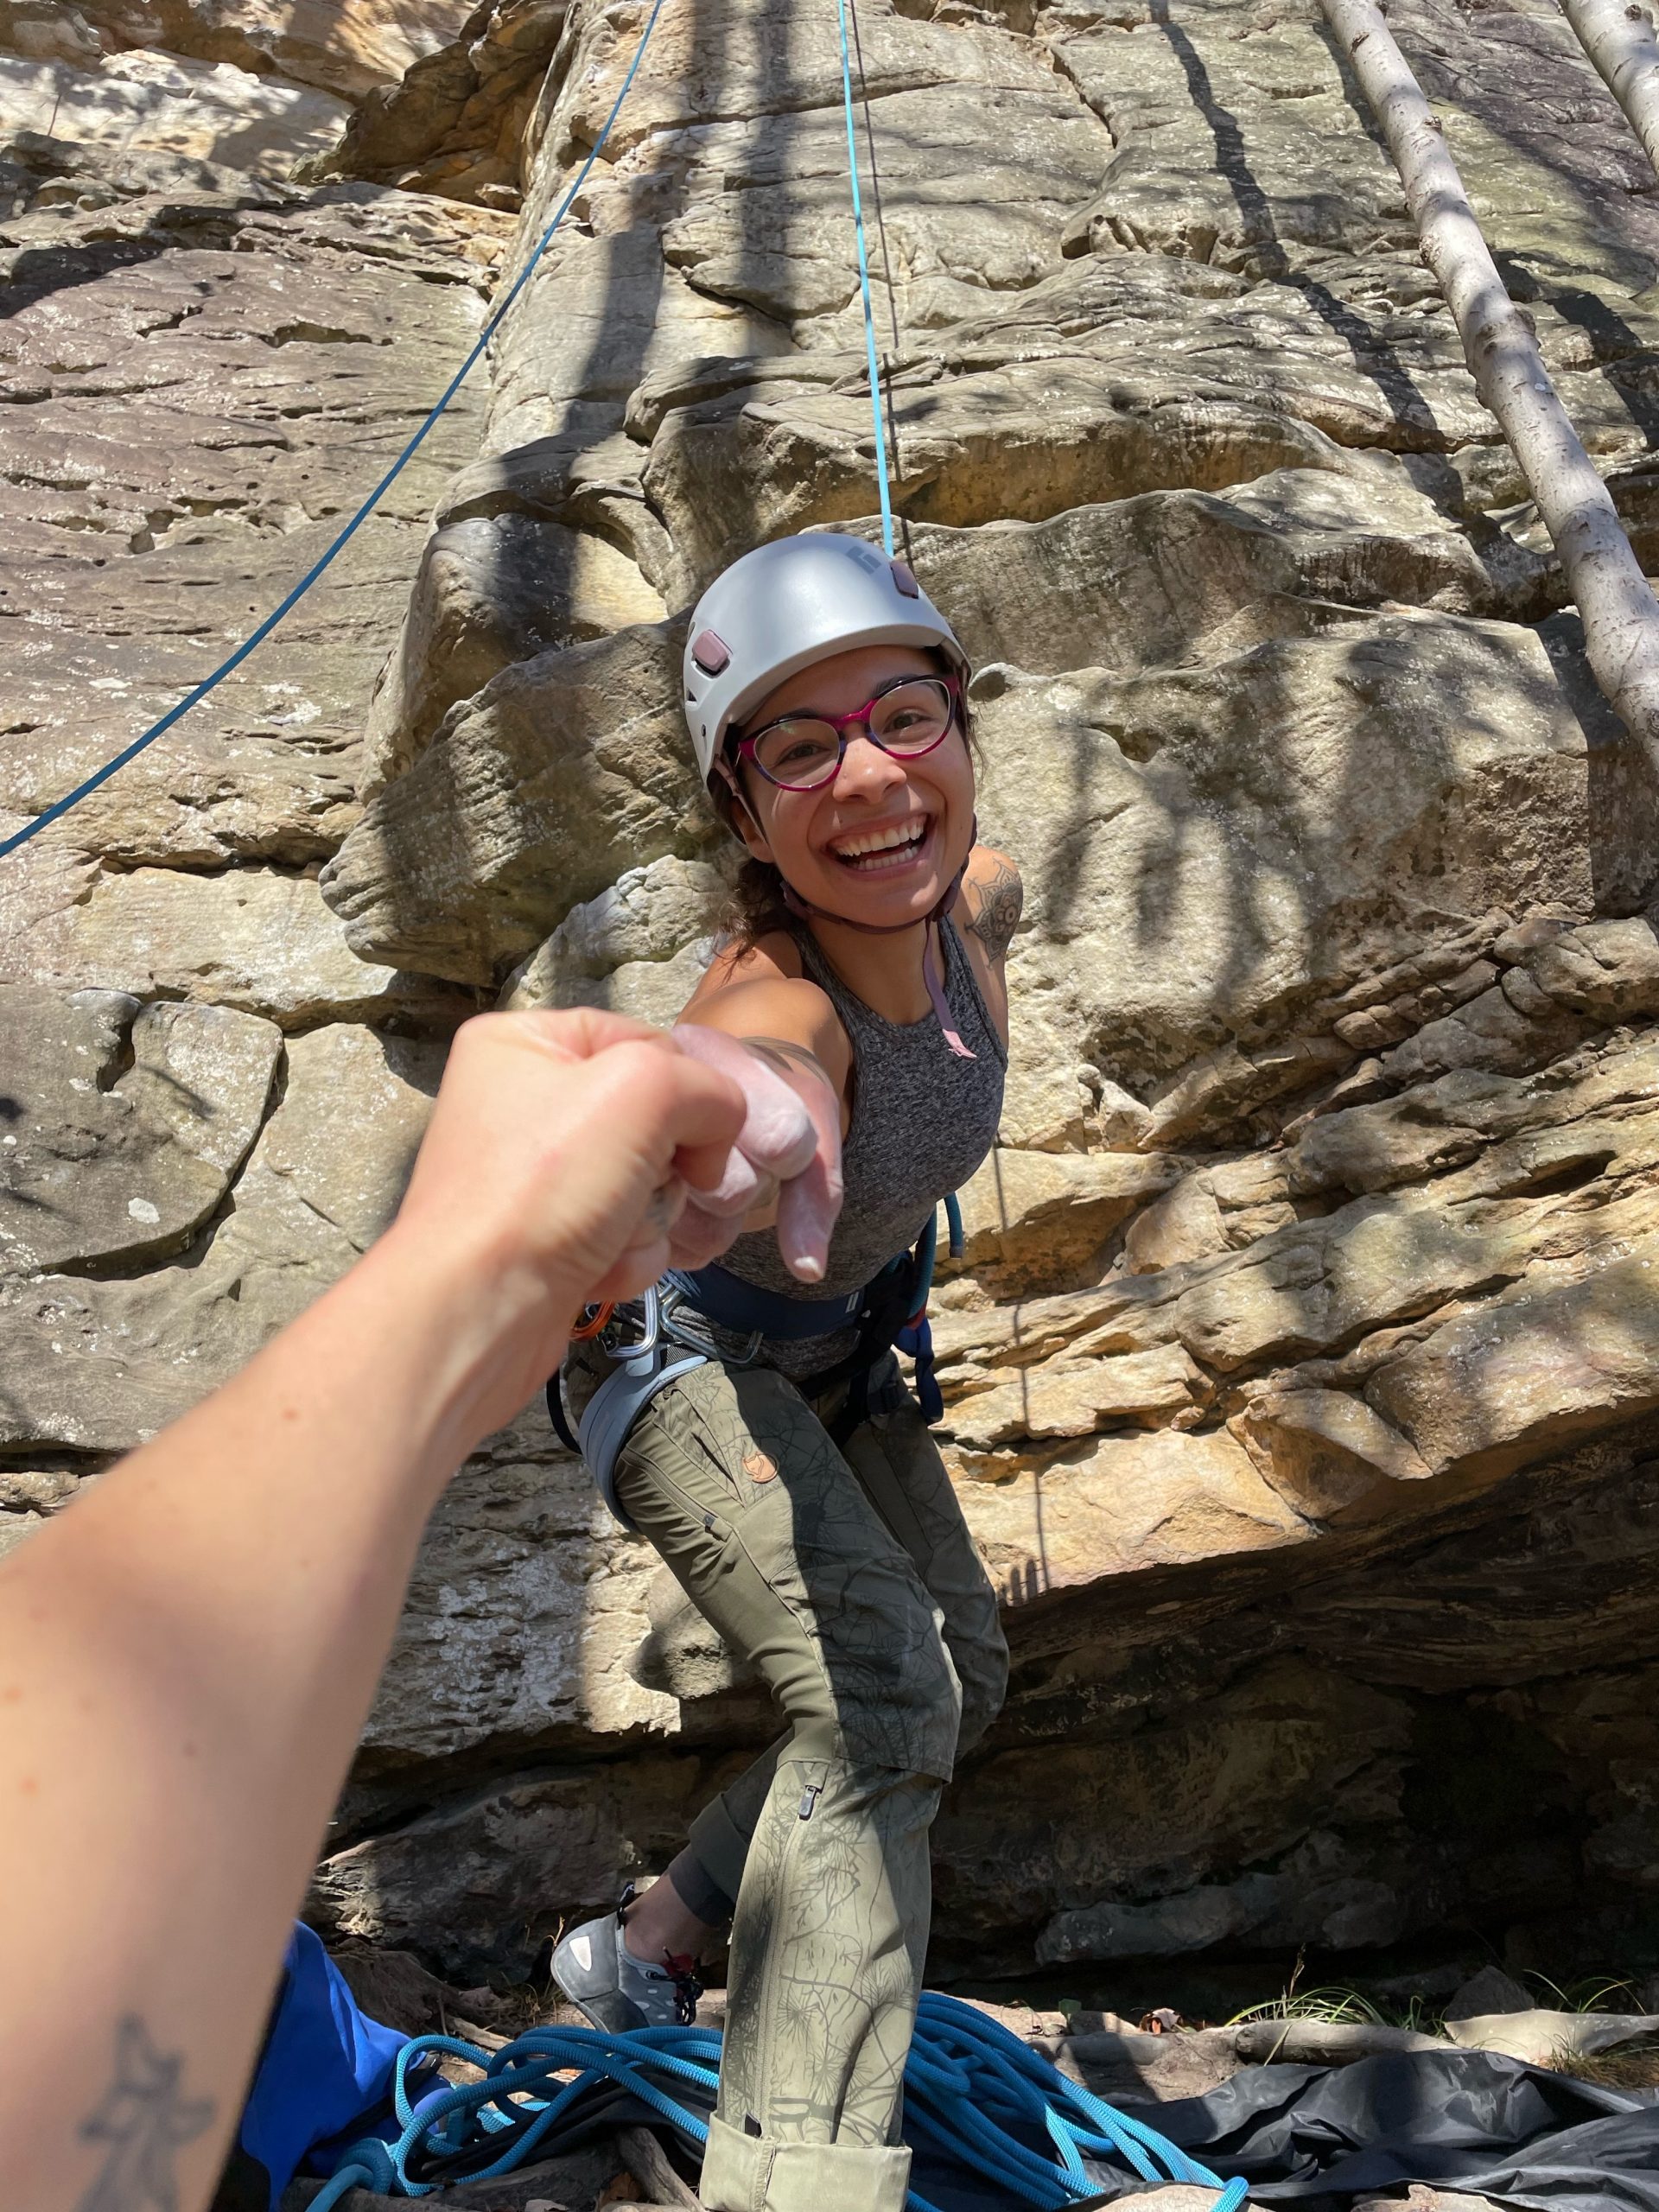 Bouldering and top rope climbing - climb smarter, not harder